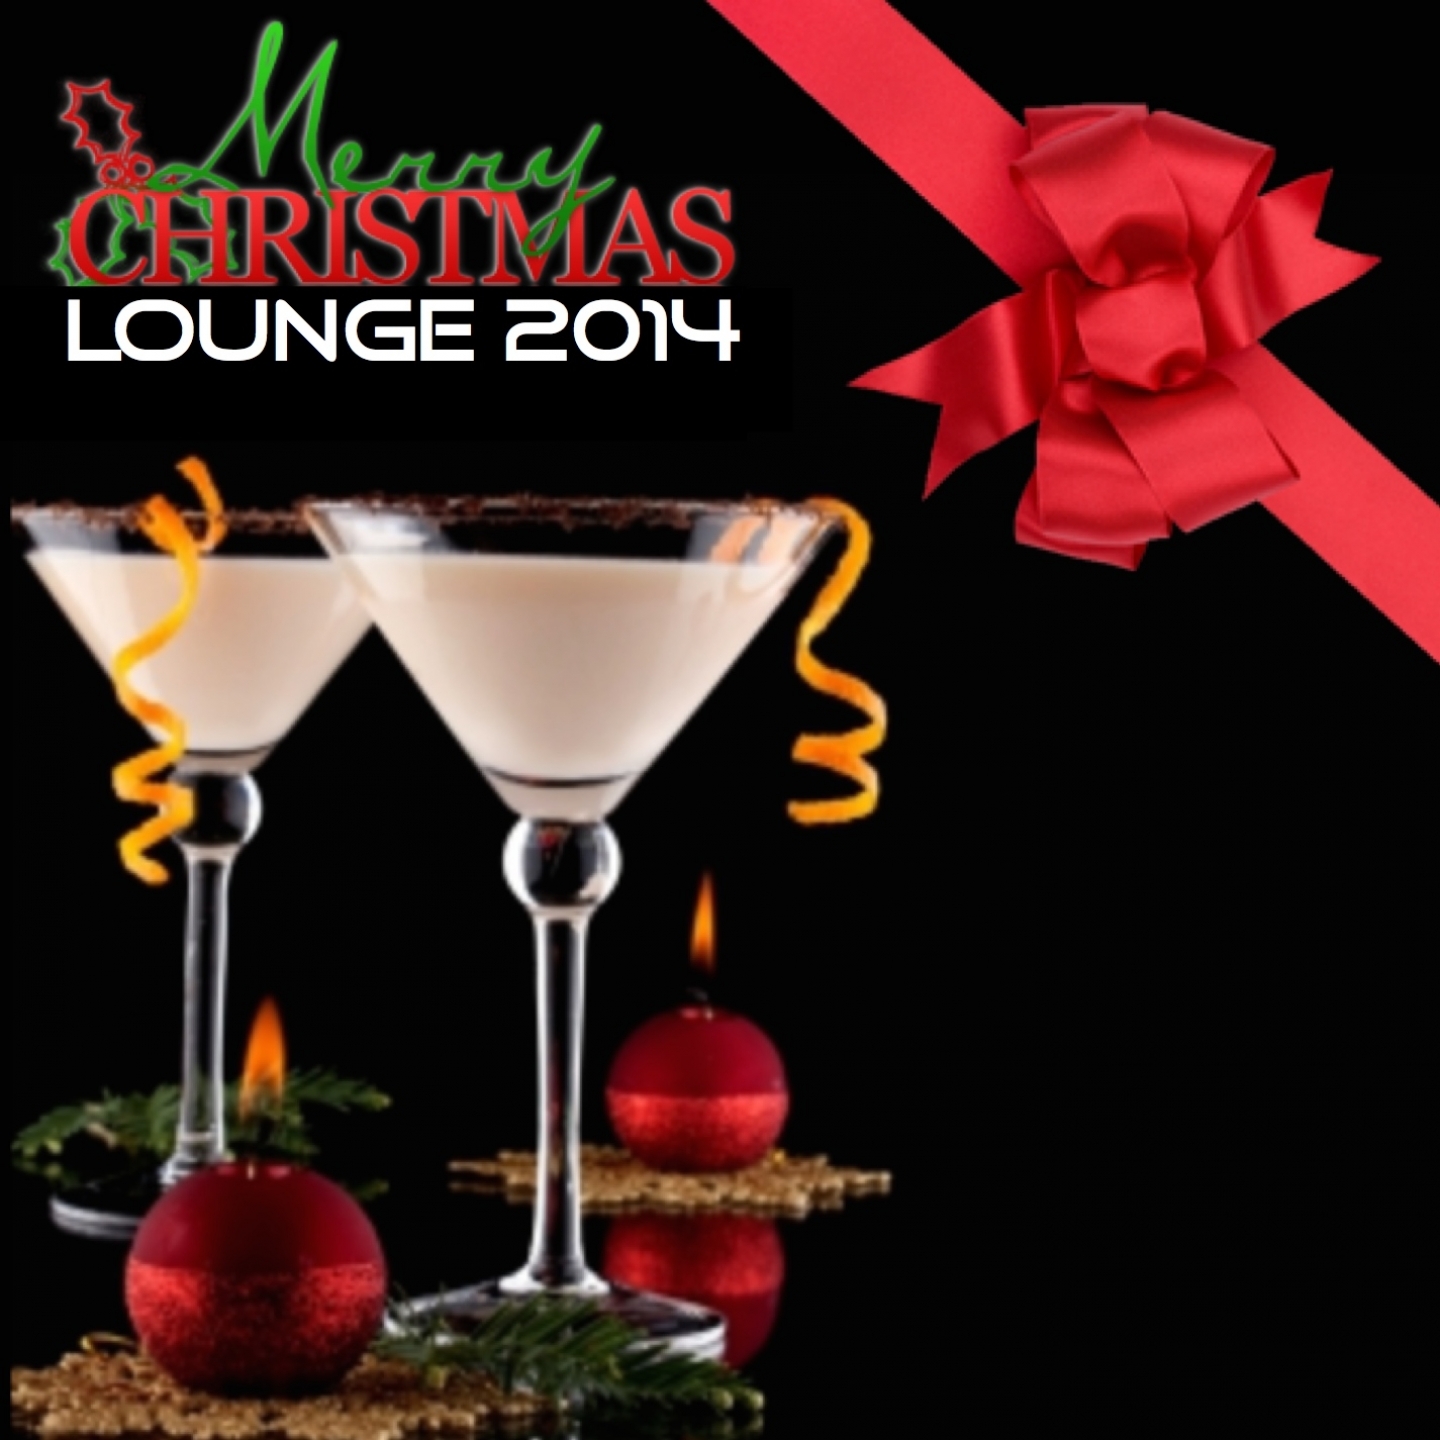 Merry Christmas Lounge 2014 (The Best Christmas Lounge and Chillout Collection 2014)